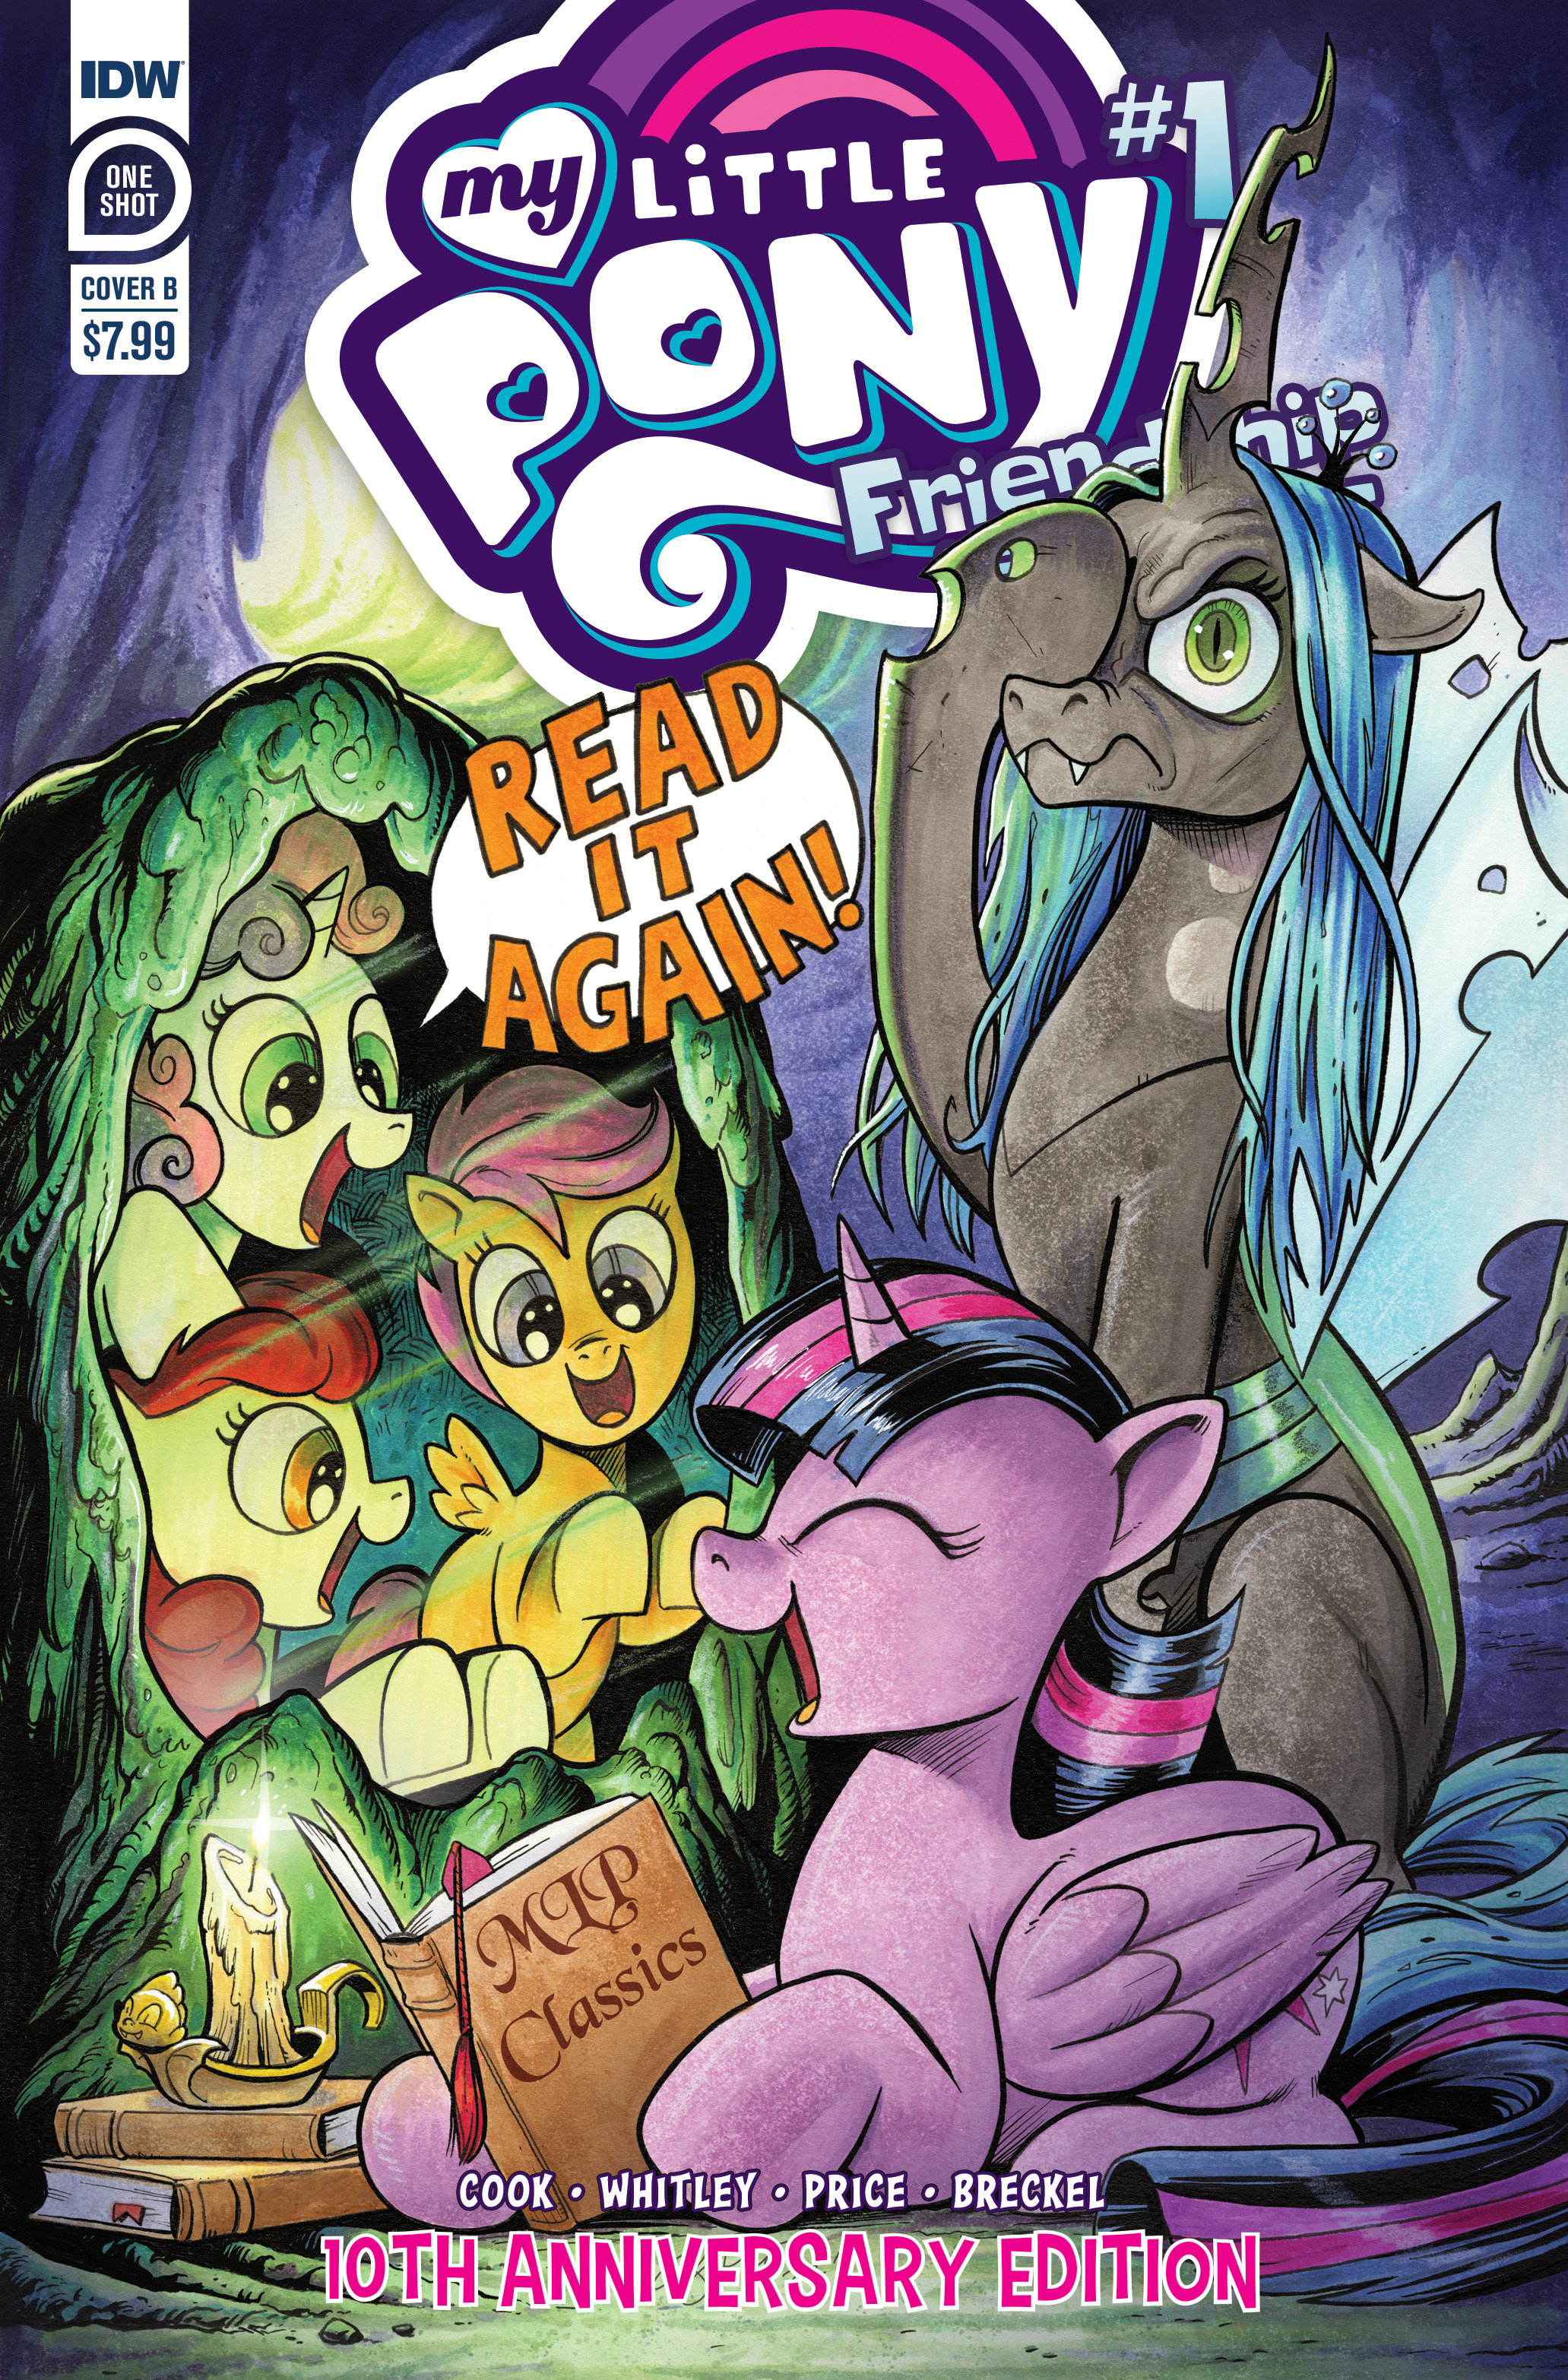 My Little Pony Friendship Is Magic 10th Anniversary Cover B Price